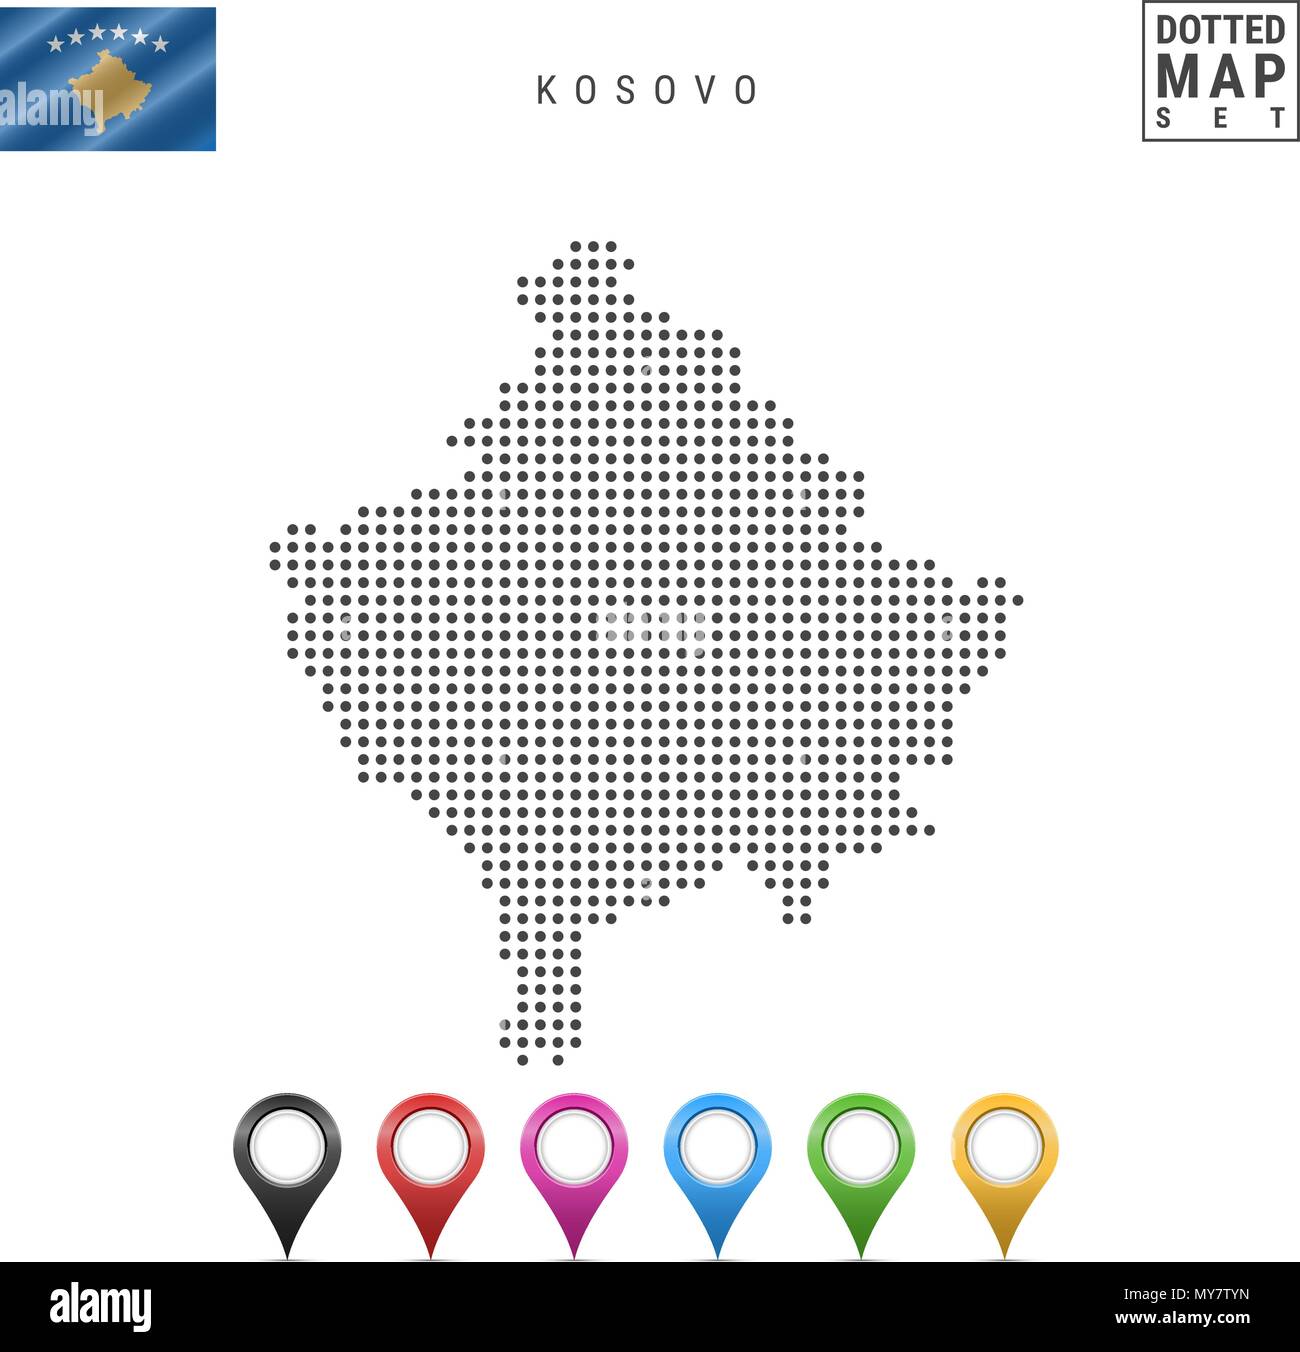 Vector Dotted Map of Kosovo. Simple Silhouette of Kosovo. The National Flag of Kosovo. Set of Multicolored Map Markers Stock Vector